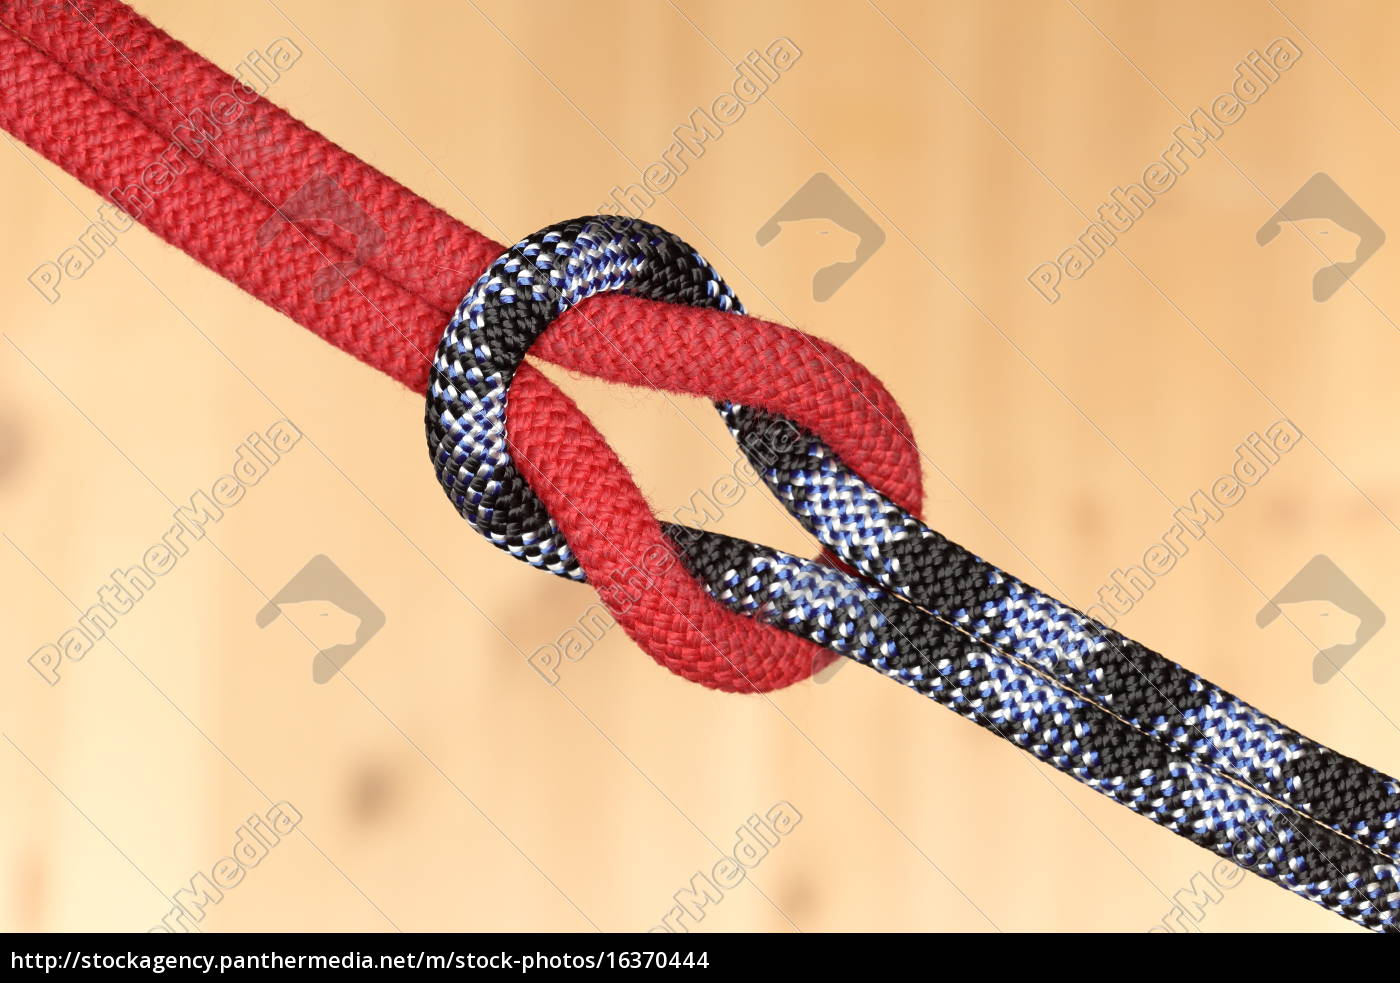 Carabiner and knot from a climbing rope. — Stock Photo